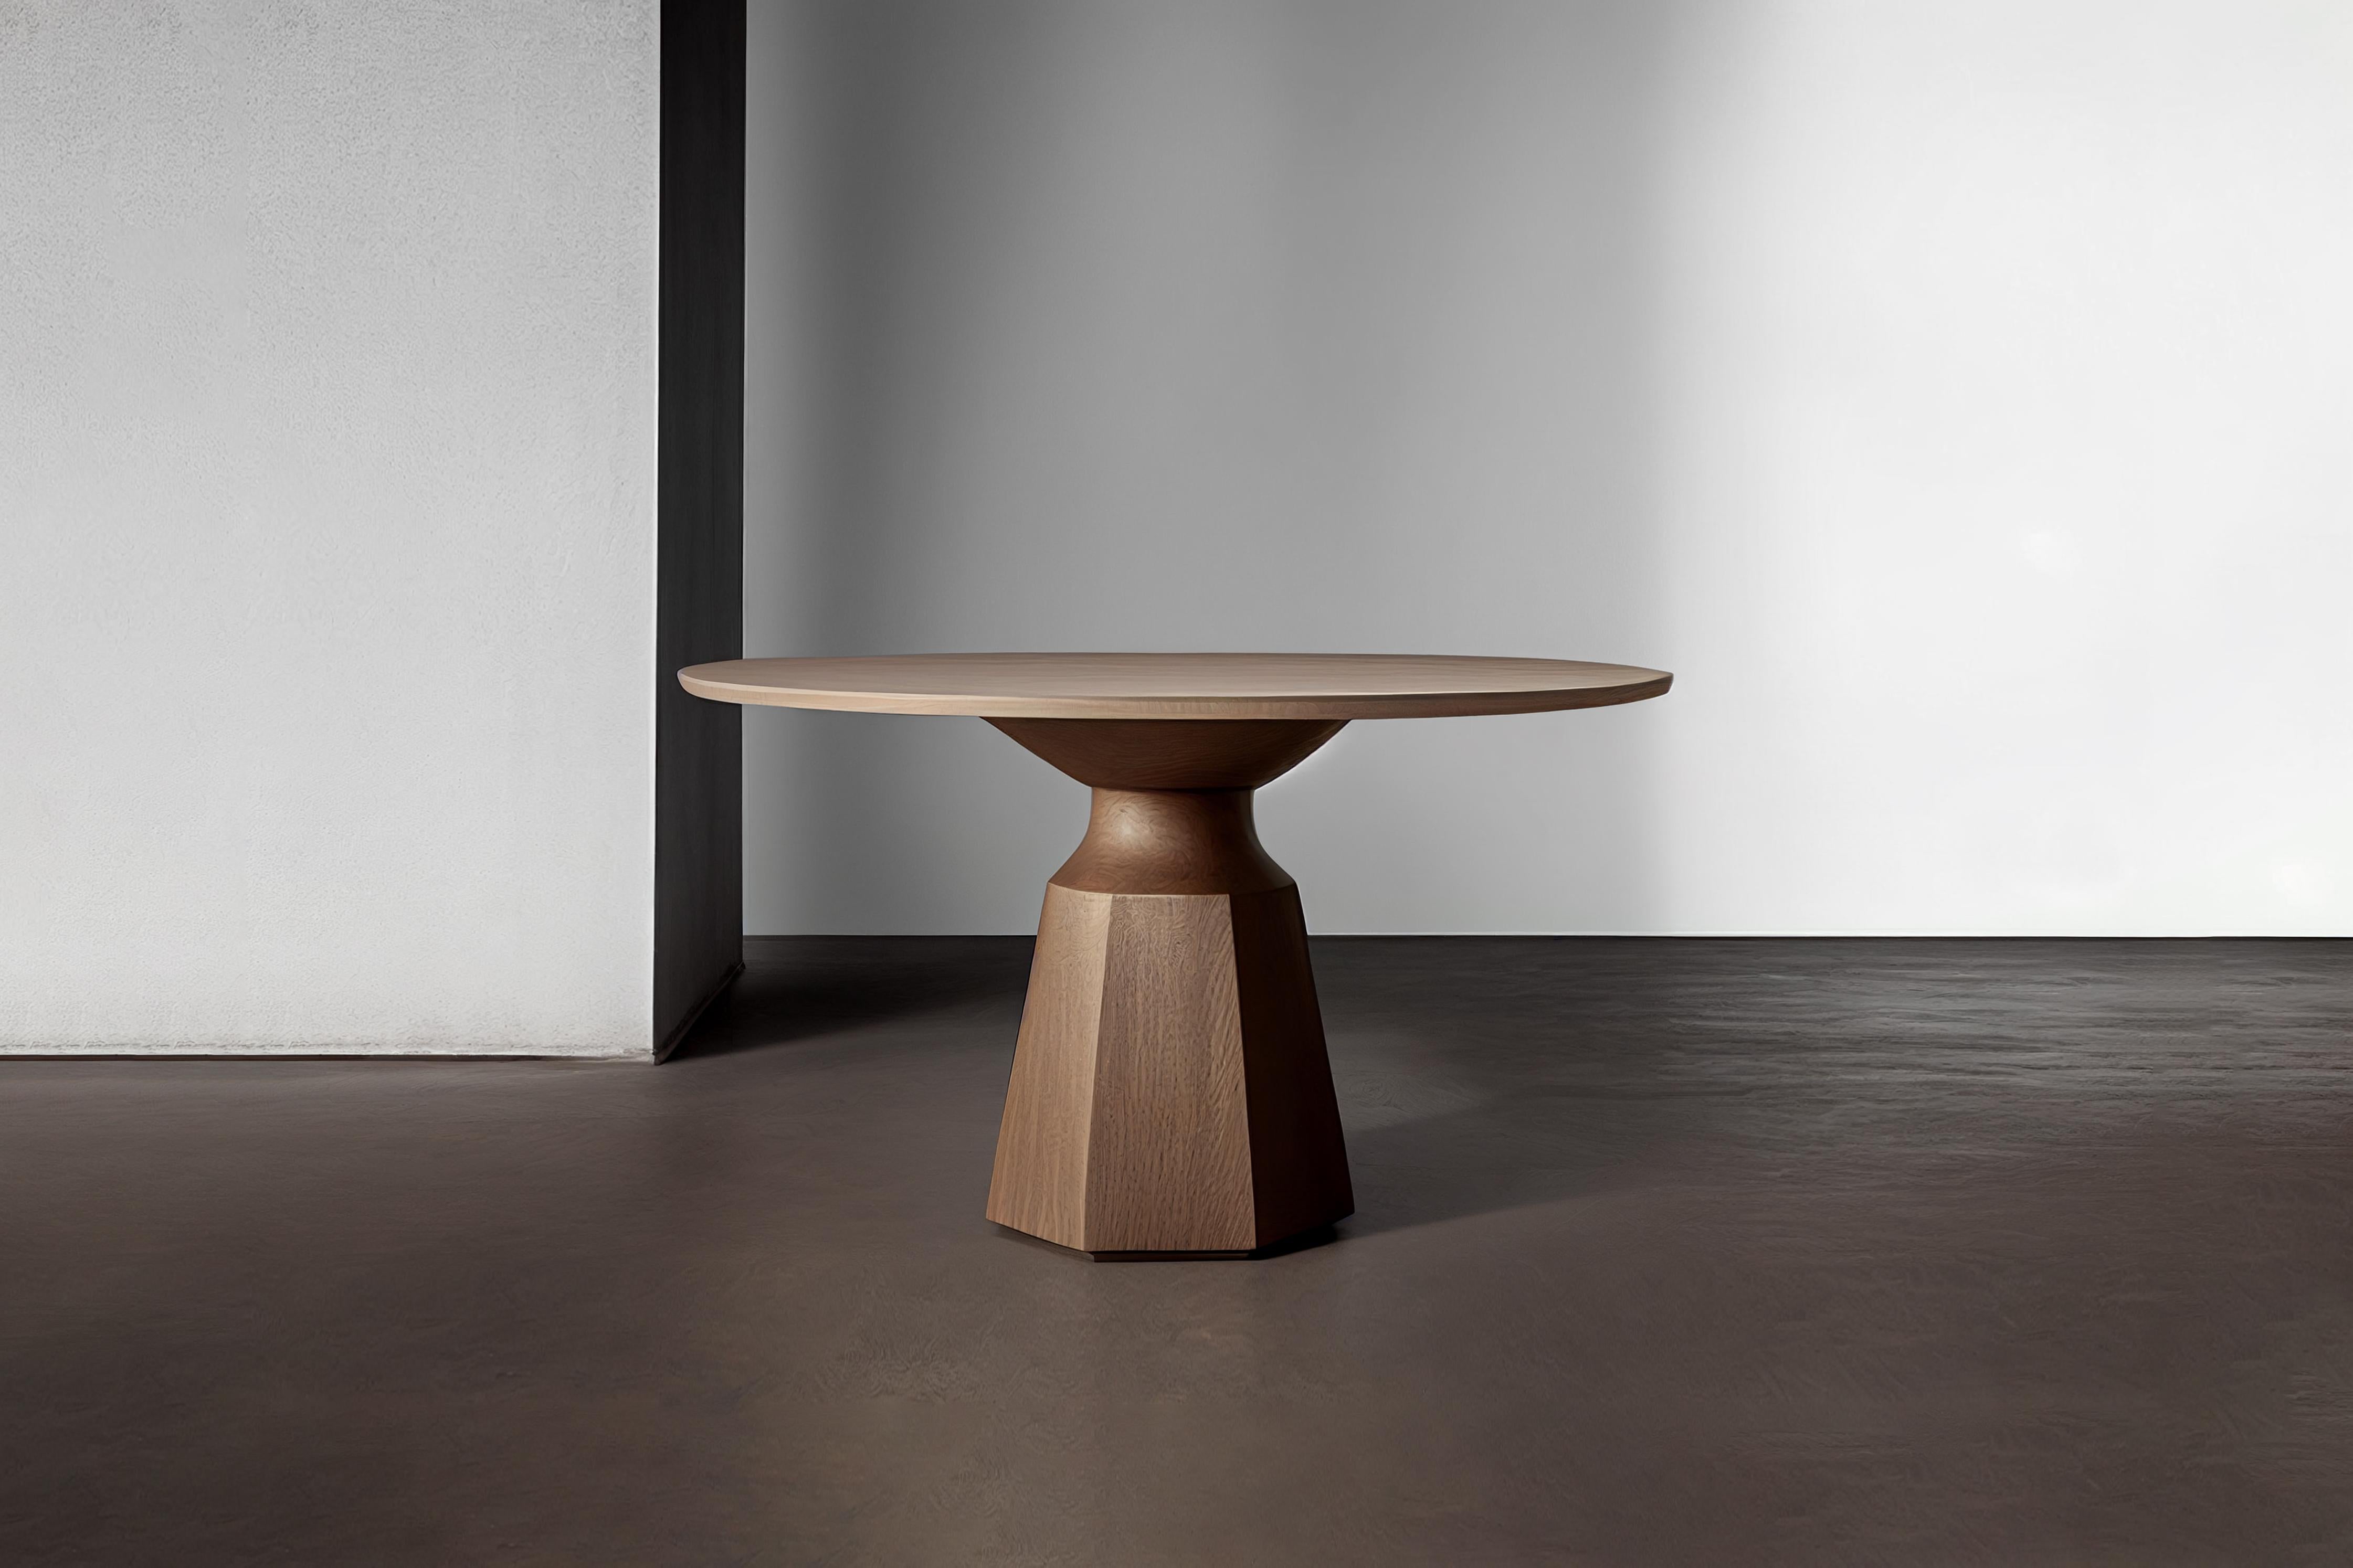 Moka dining table, round table for four by NONO.

The Moka dining table is a sculptural dining table collection inspired by the iconic Italian moka pot. Crafted from solid wood, its contemporary shapes is a design of the NONO design team. With a